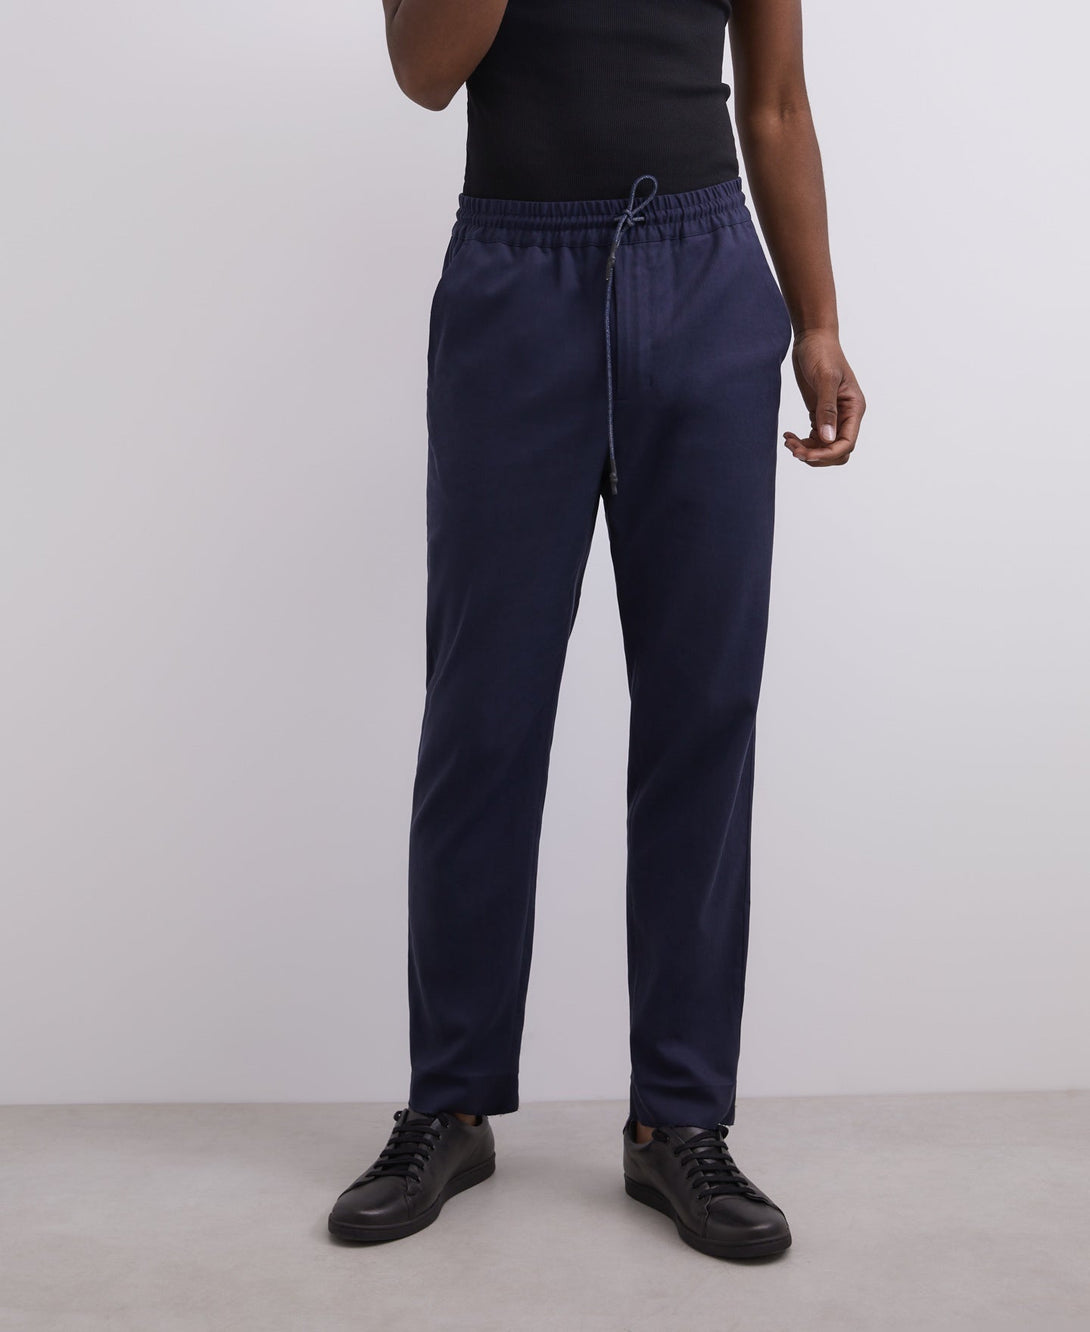 Men Trousers | Navy Blue Carrot Fit Lyocell Trousers by Spanish designer Adolfo Dominguez